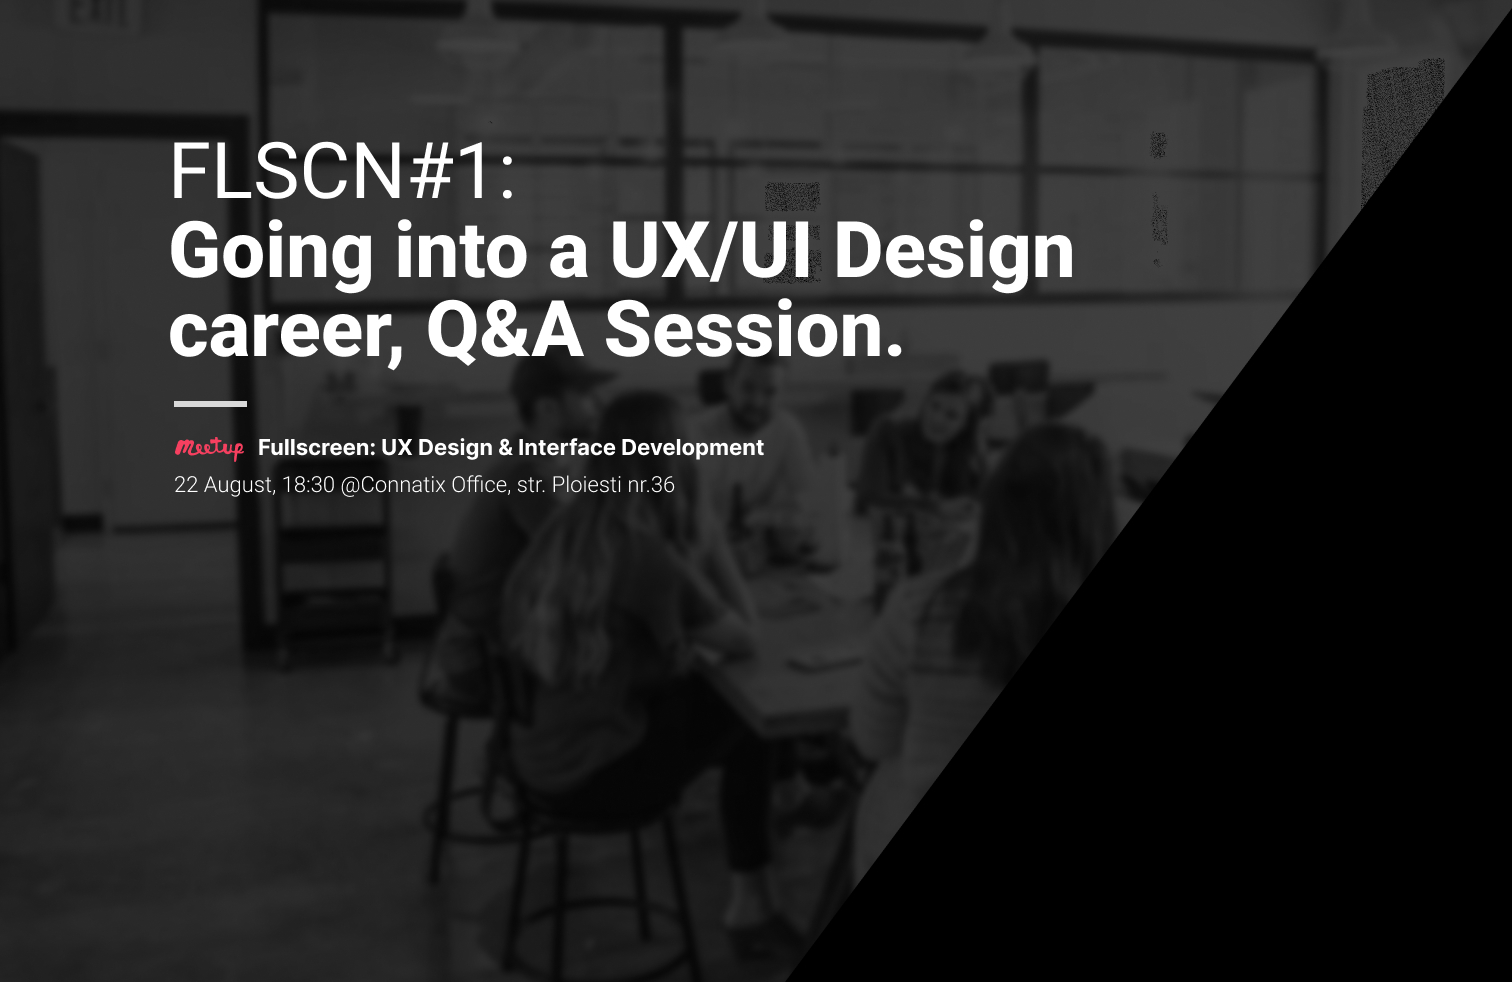 FLSCN#1: Going into a UX/UI Design career, Q&A Session